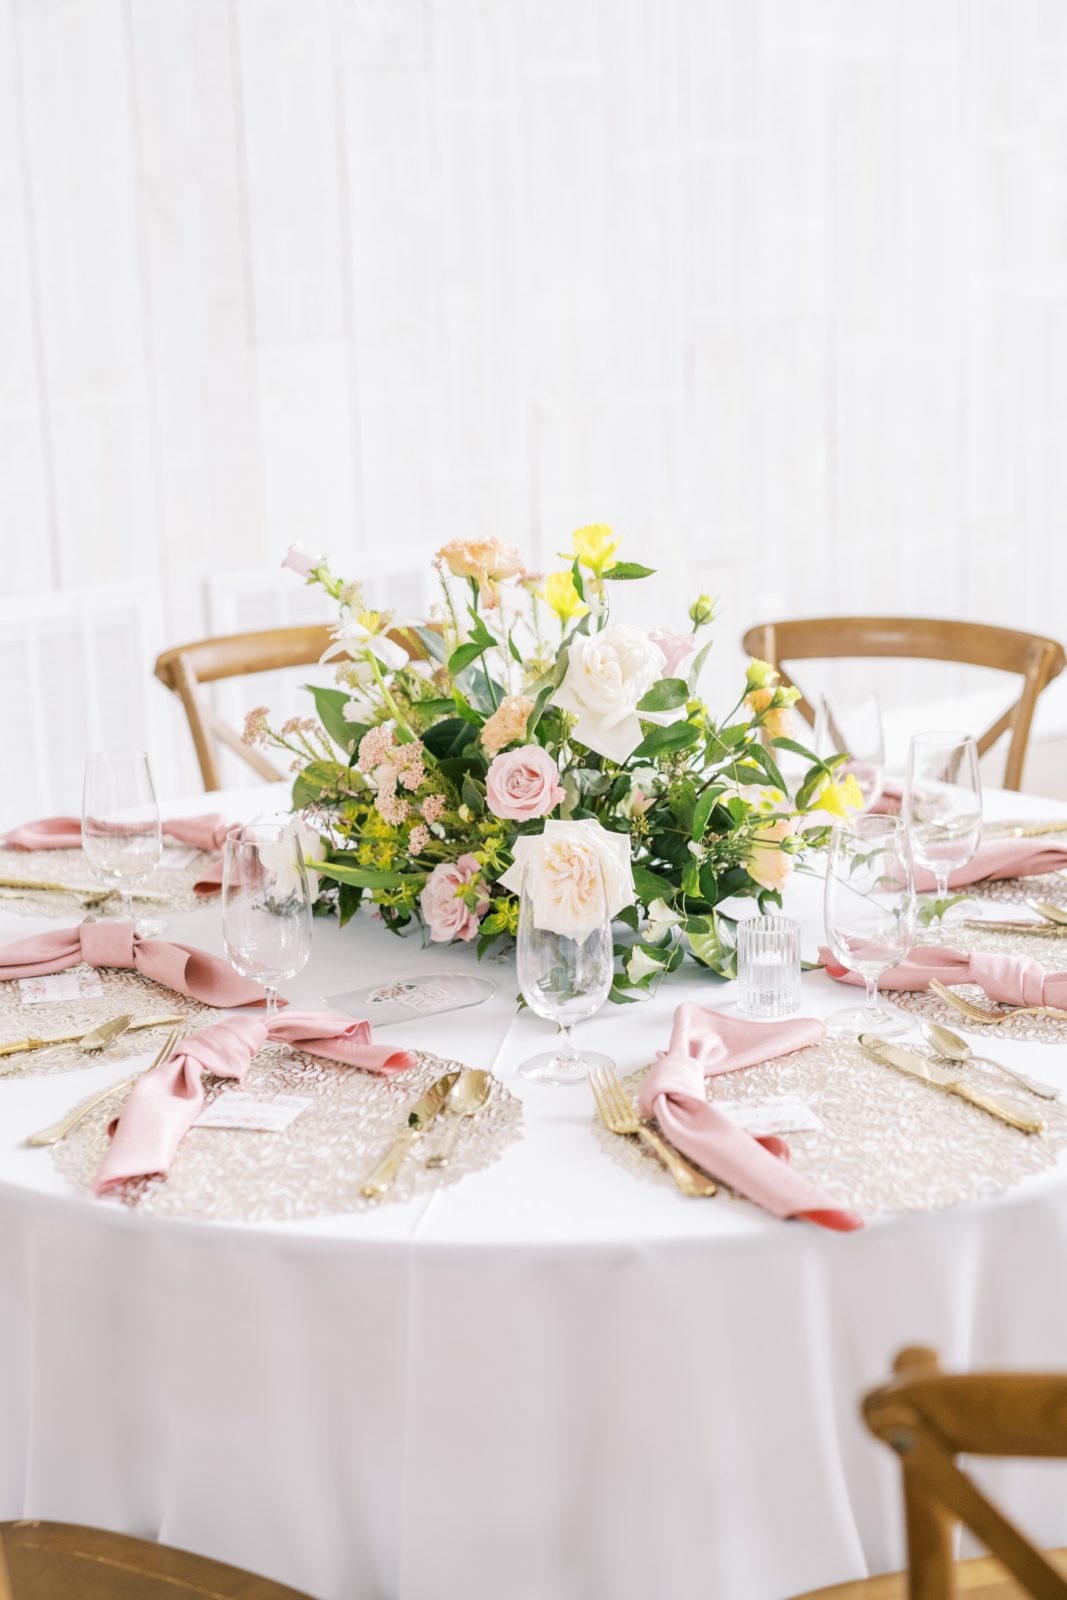 Christina Elliott Photography captures a wedding luncheon with wood chairs and lace doilies in Houston. feminine wedding luncheons #ChristinaElliottPhotography #ChristinaElliottWeddings #Houstonwedding #TheSpringsVenue #EastHoustonweddings